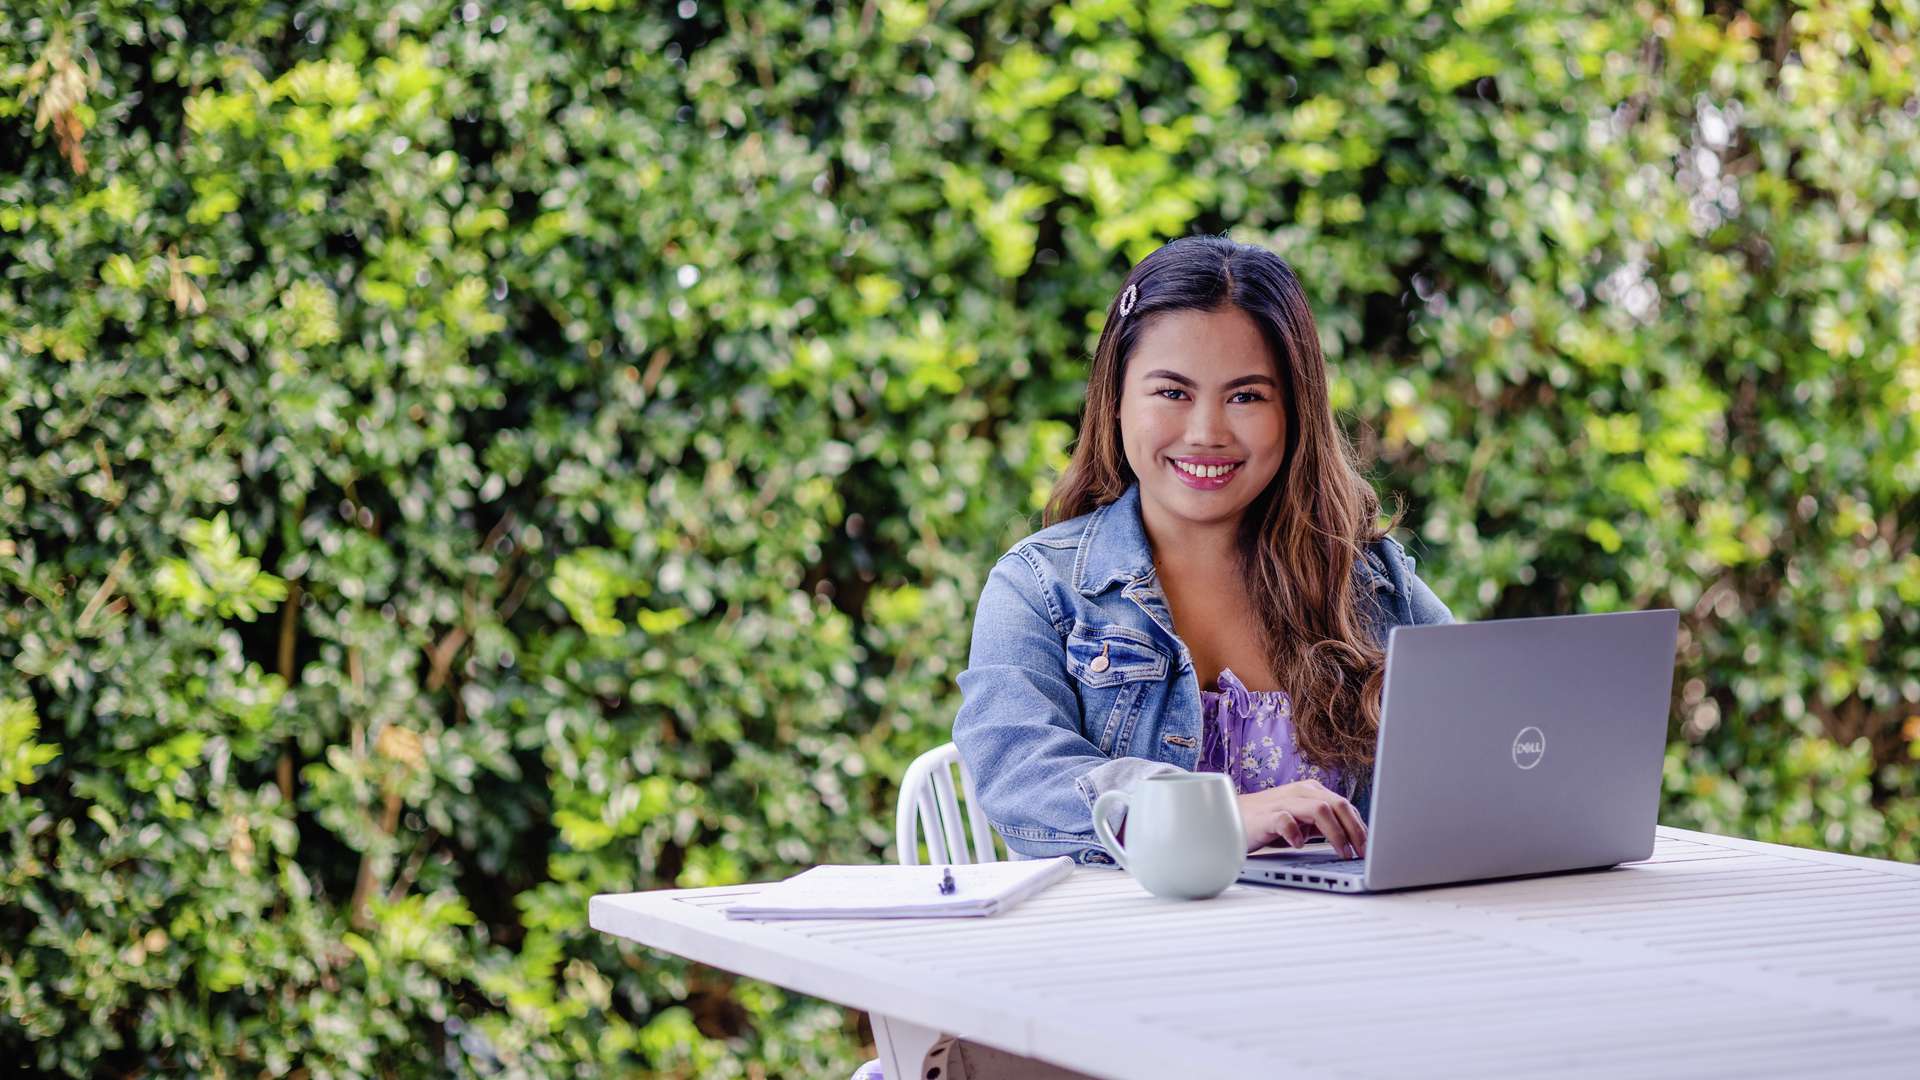 An online student studying at table in garden with laptop